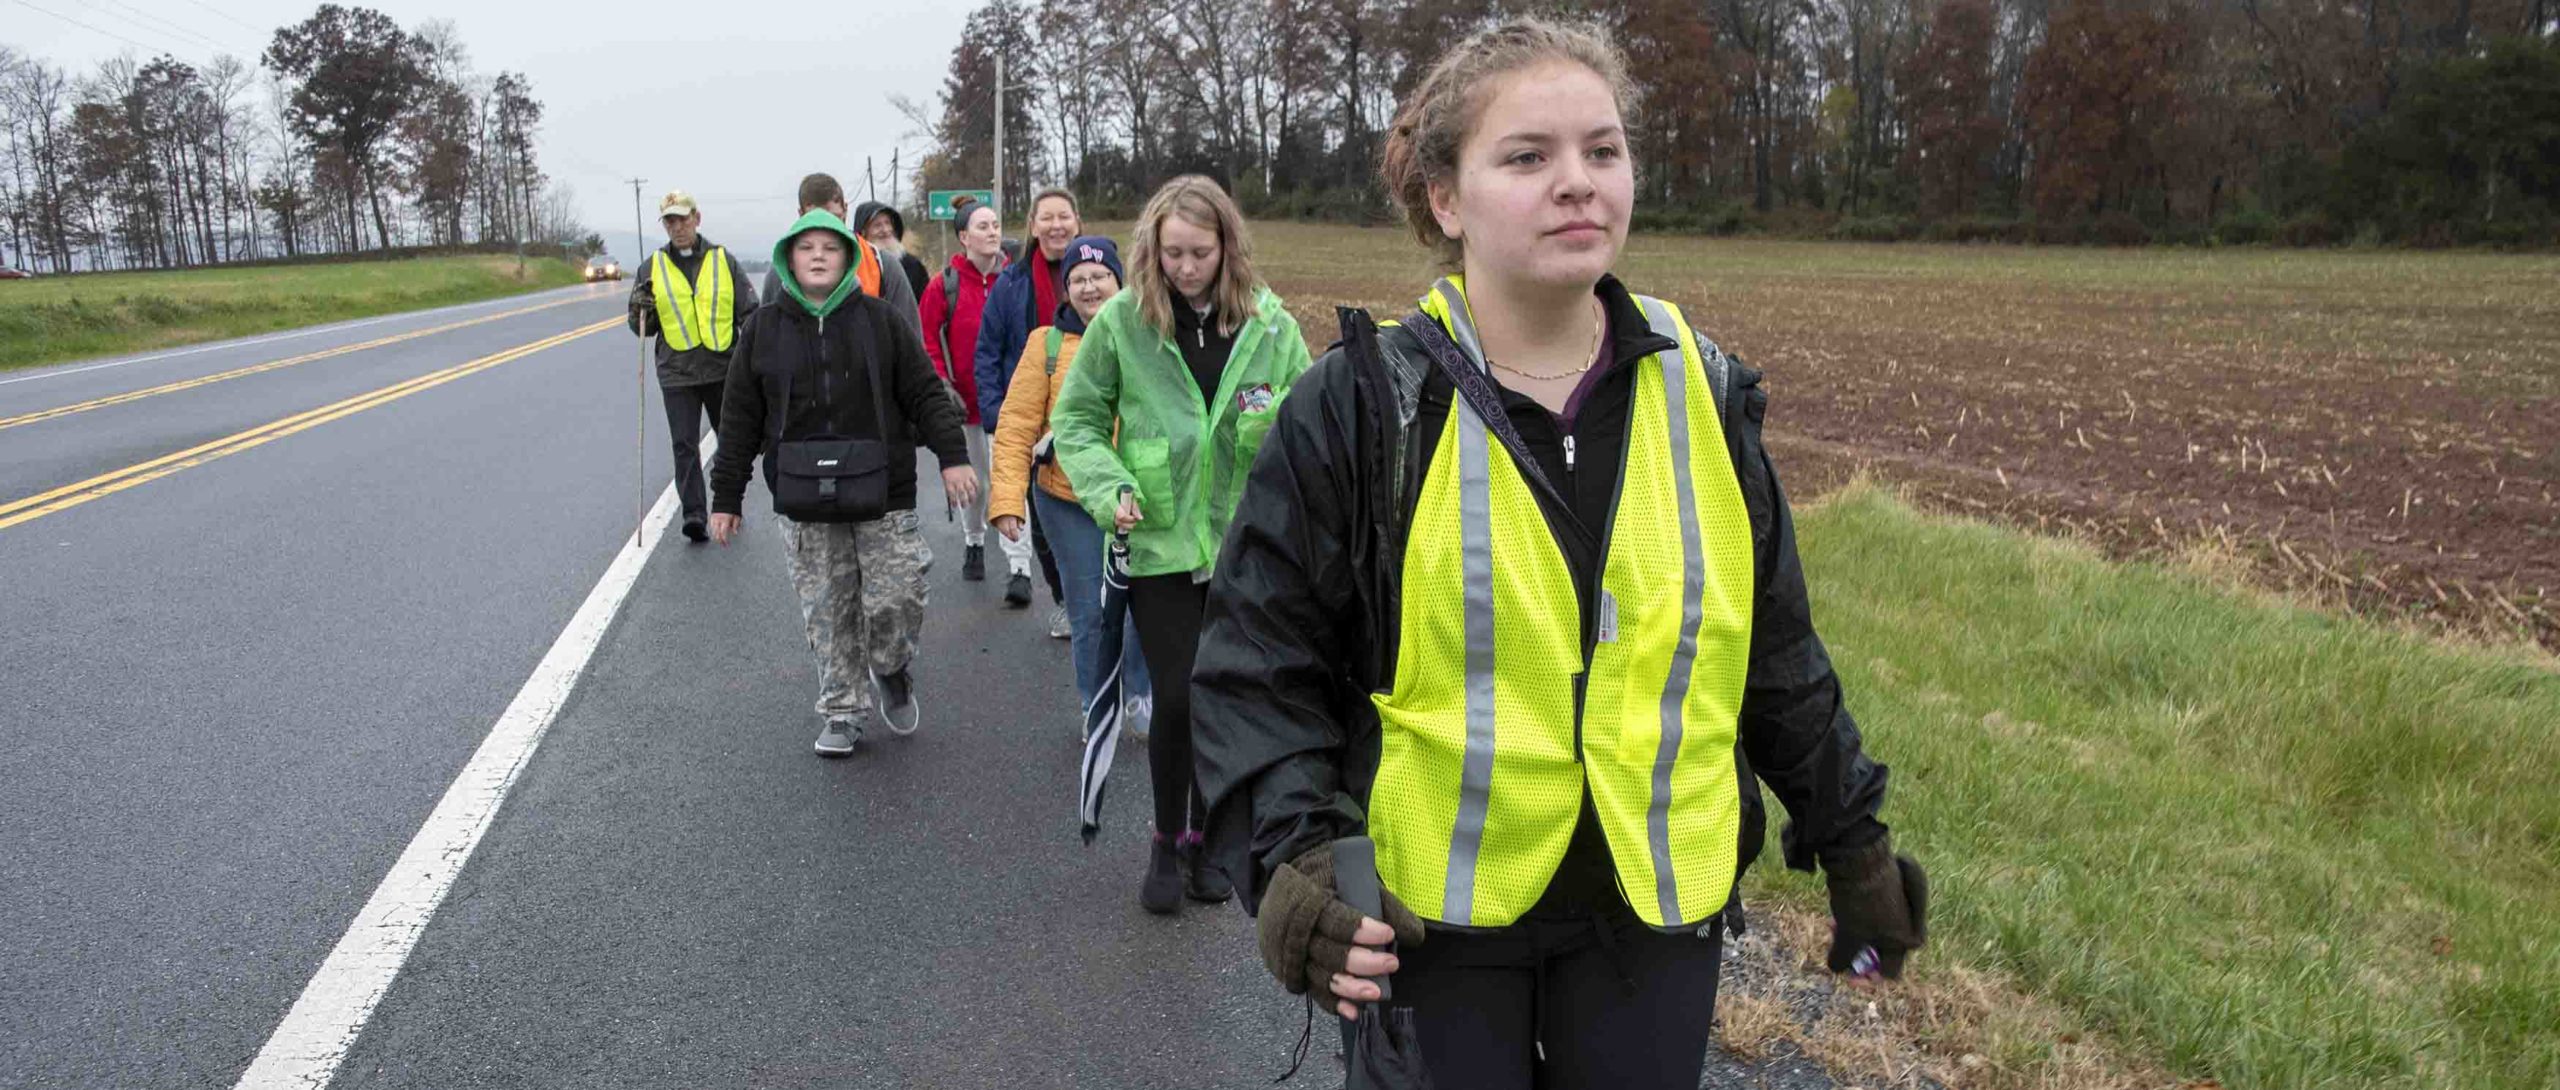 Pilgrims set out on 50-mile walk in penance, prayer from Emmitsburg to Baltimore